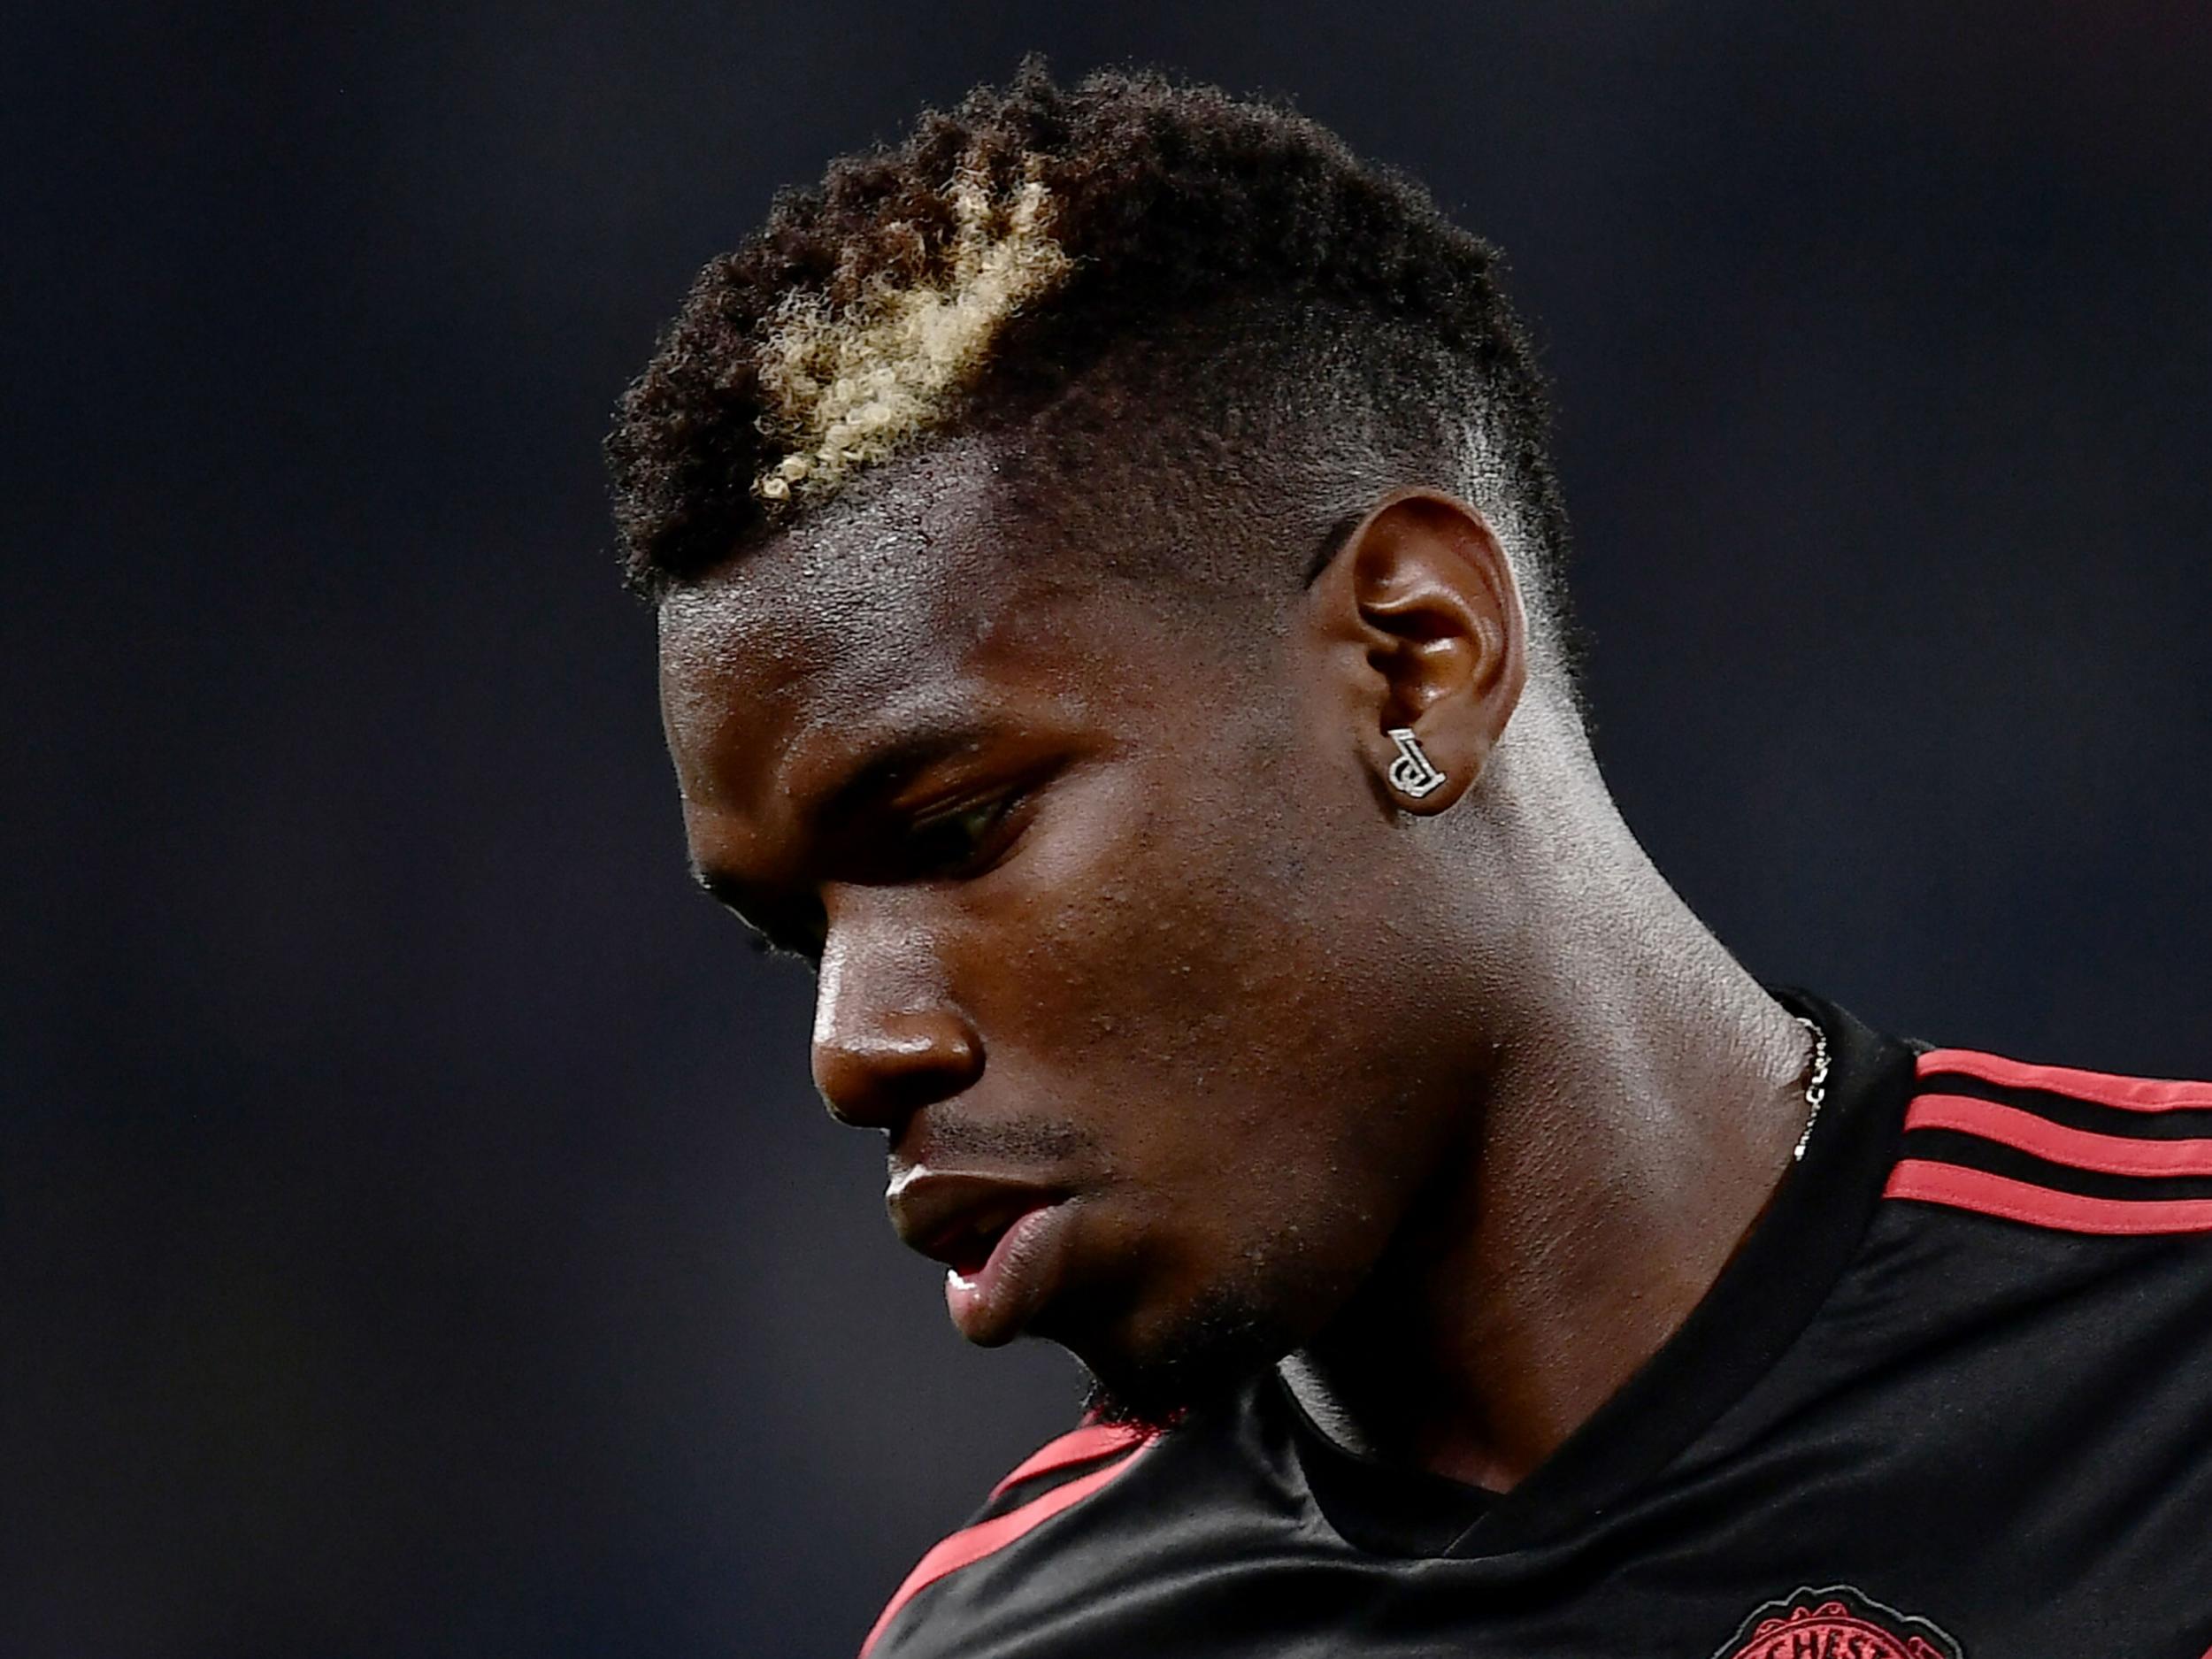 Paul Pogba trained indoors on Friday after picking up 'a little injury'